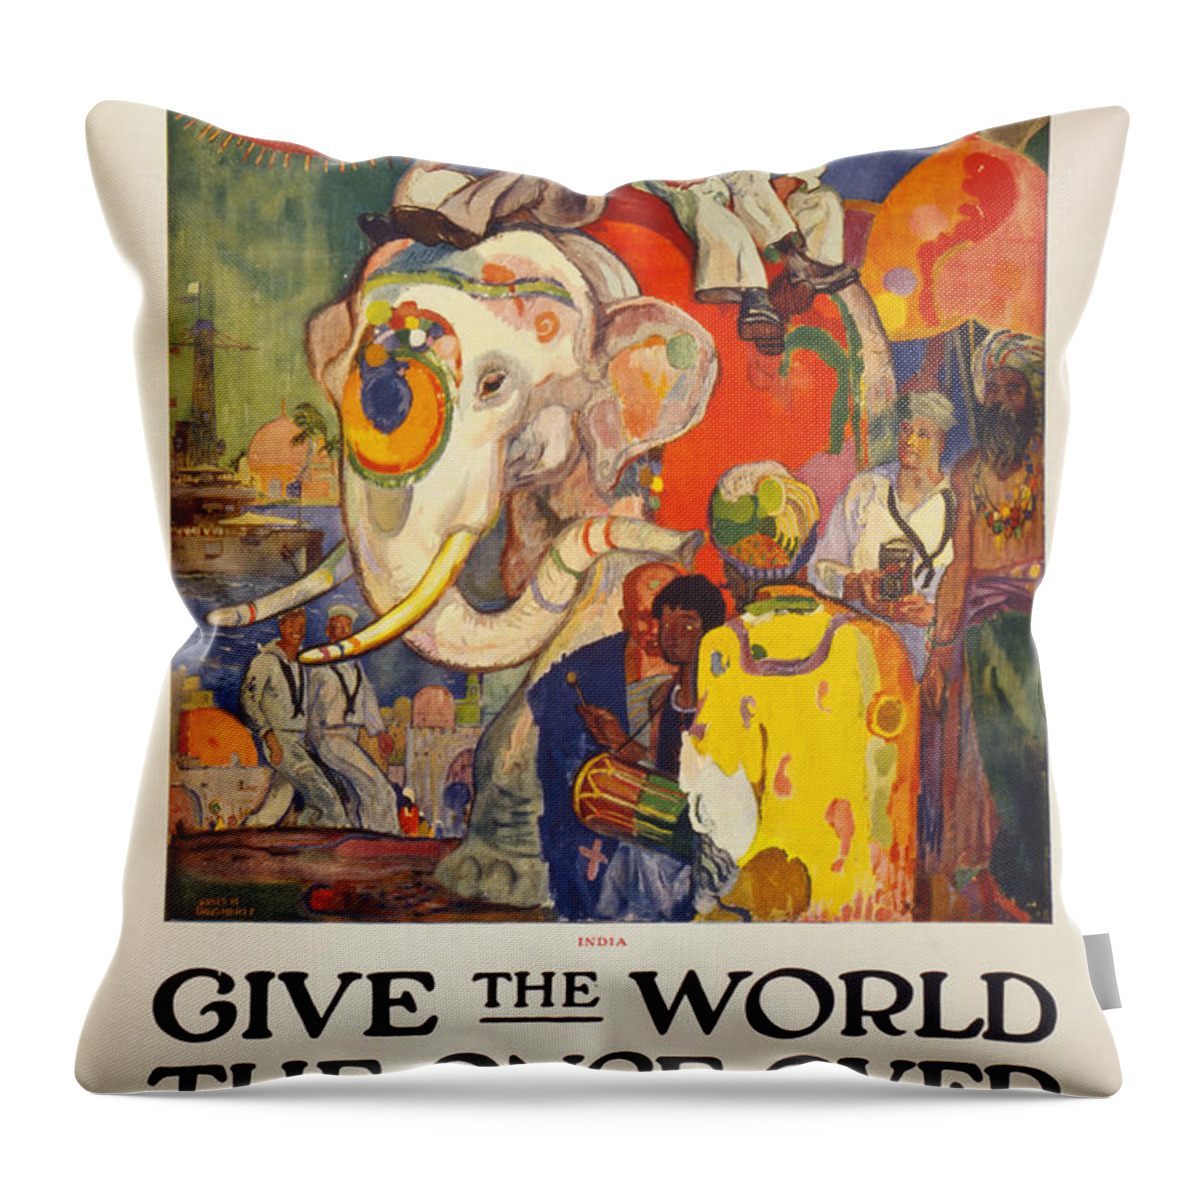 1919 Throw Pillow featuring the painting Navy Poster, 1919 by Granger